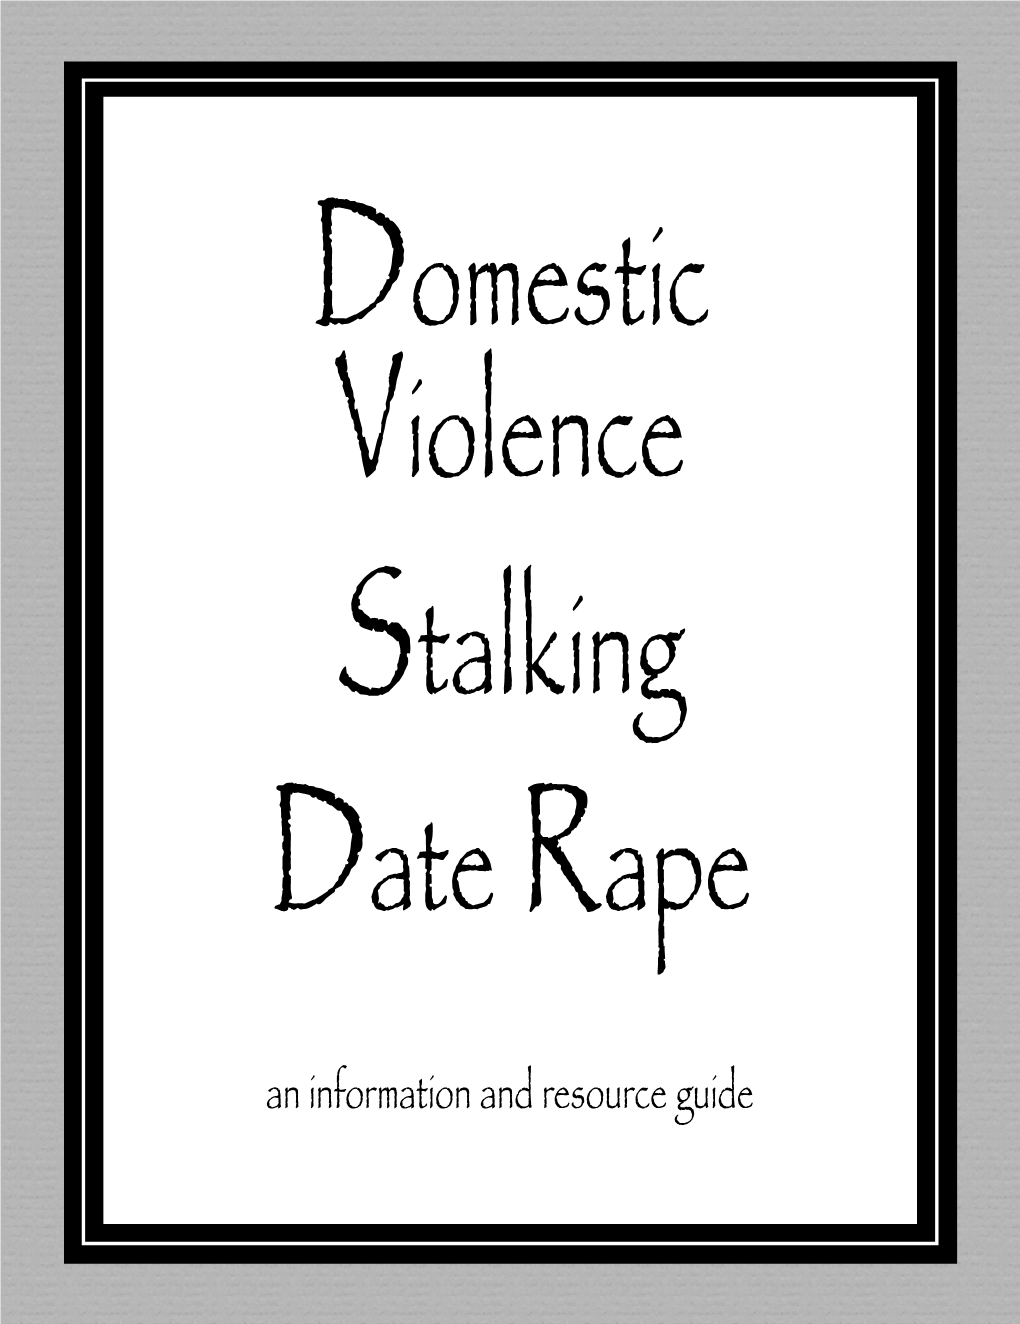 Domestic Violence Stalking Date Rape an Information and Resource Guide Dear Friends: Domestic Violence, Stalking and Date Rape Are All Serious Crimes